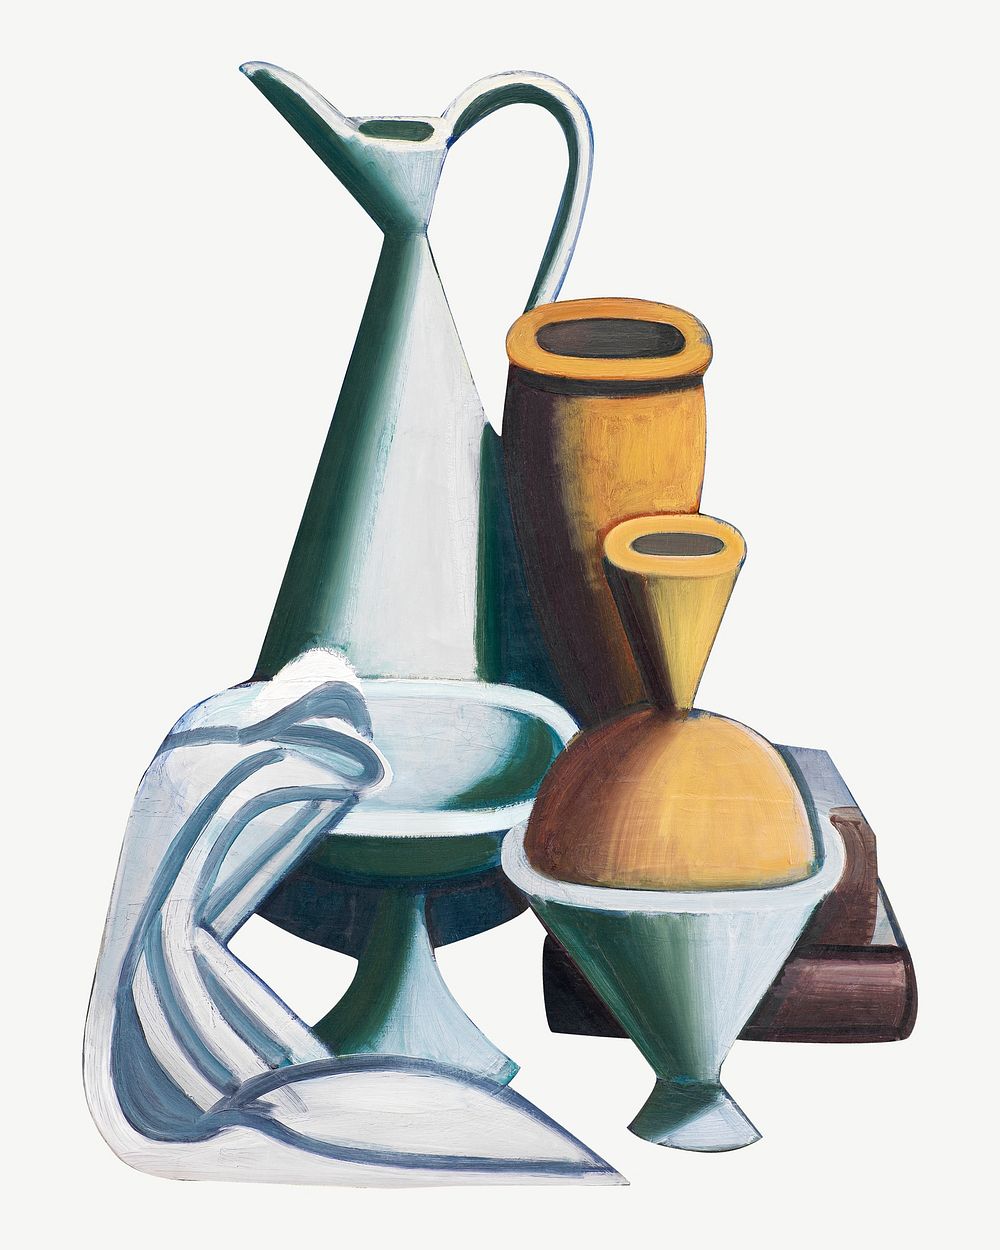 Watering can, towel and jars, vintage illustration by Vilhelm Lundstrom psd. Remixed by rawpixel.